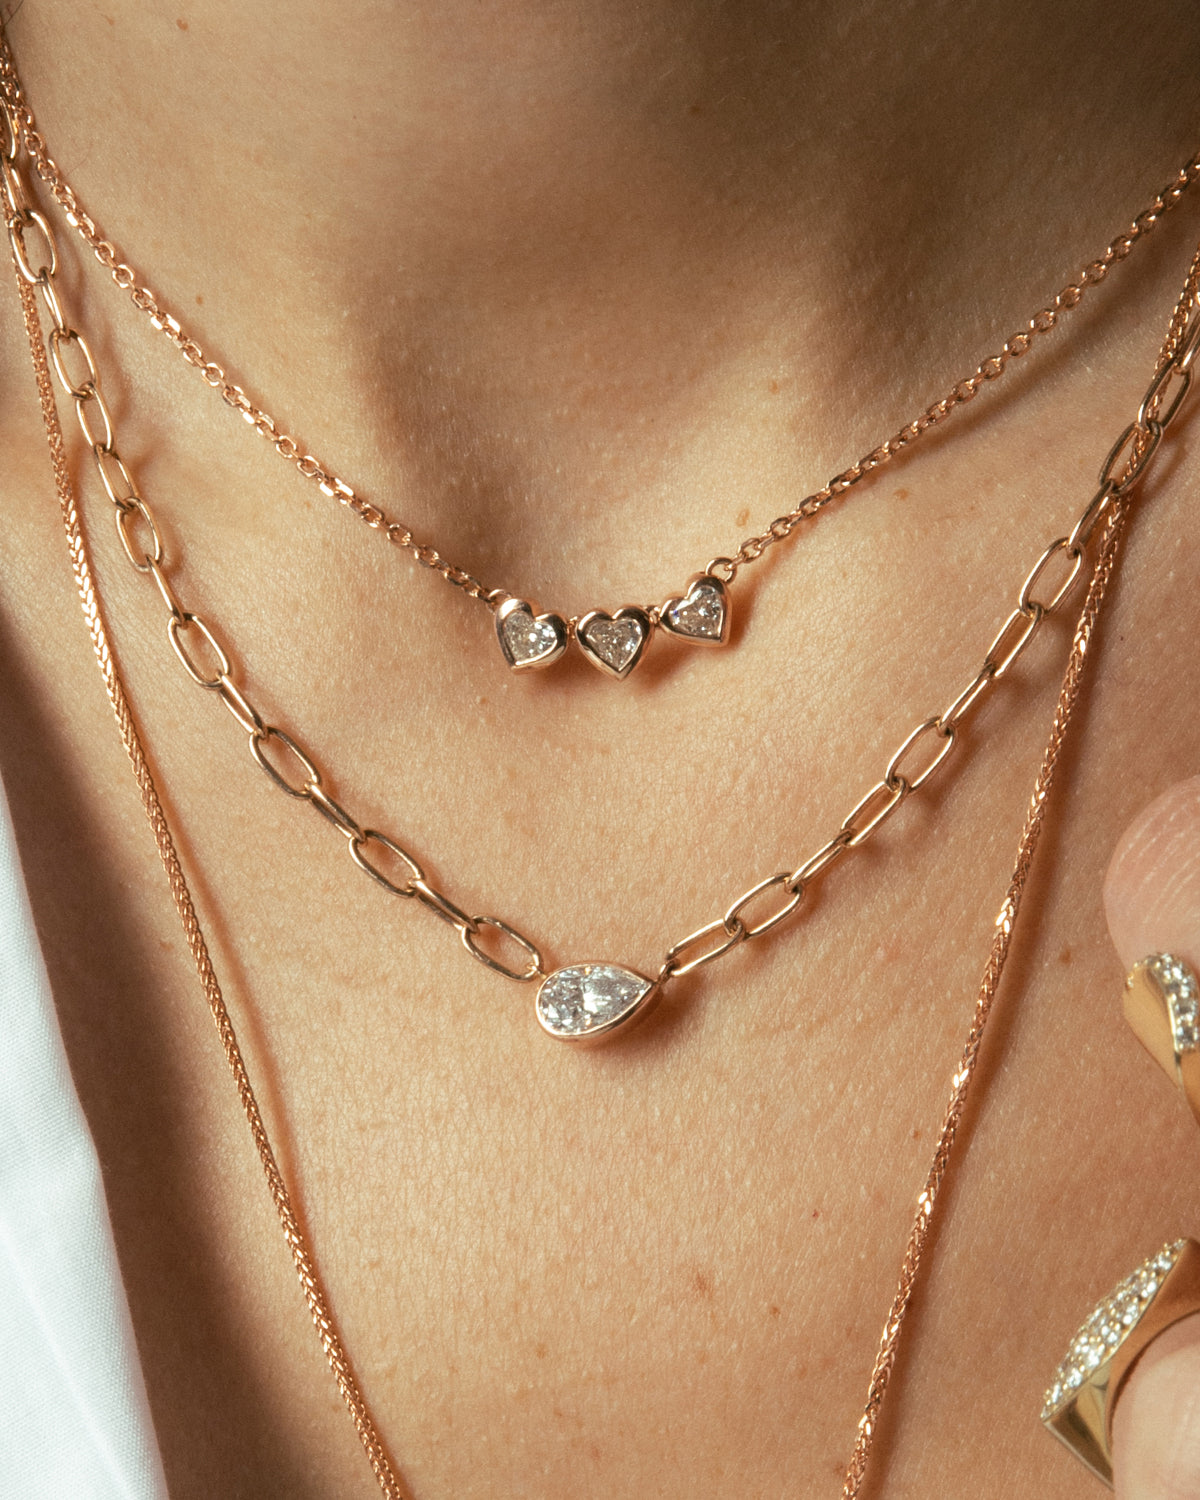 1.00 Carat Pear Link Necklace shown in rose gold